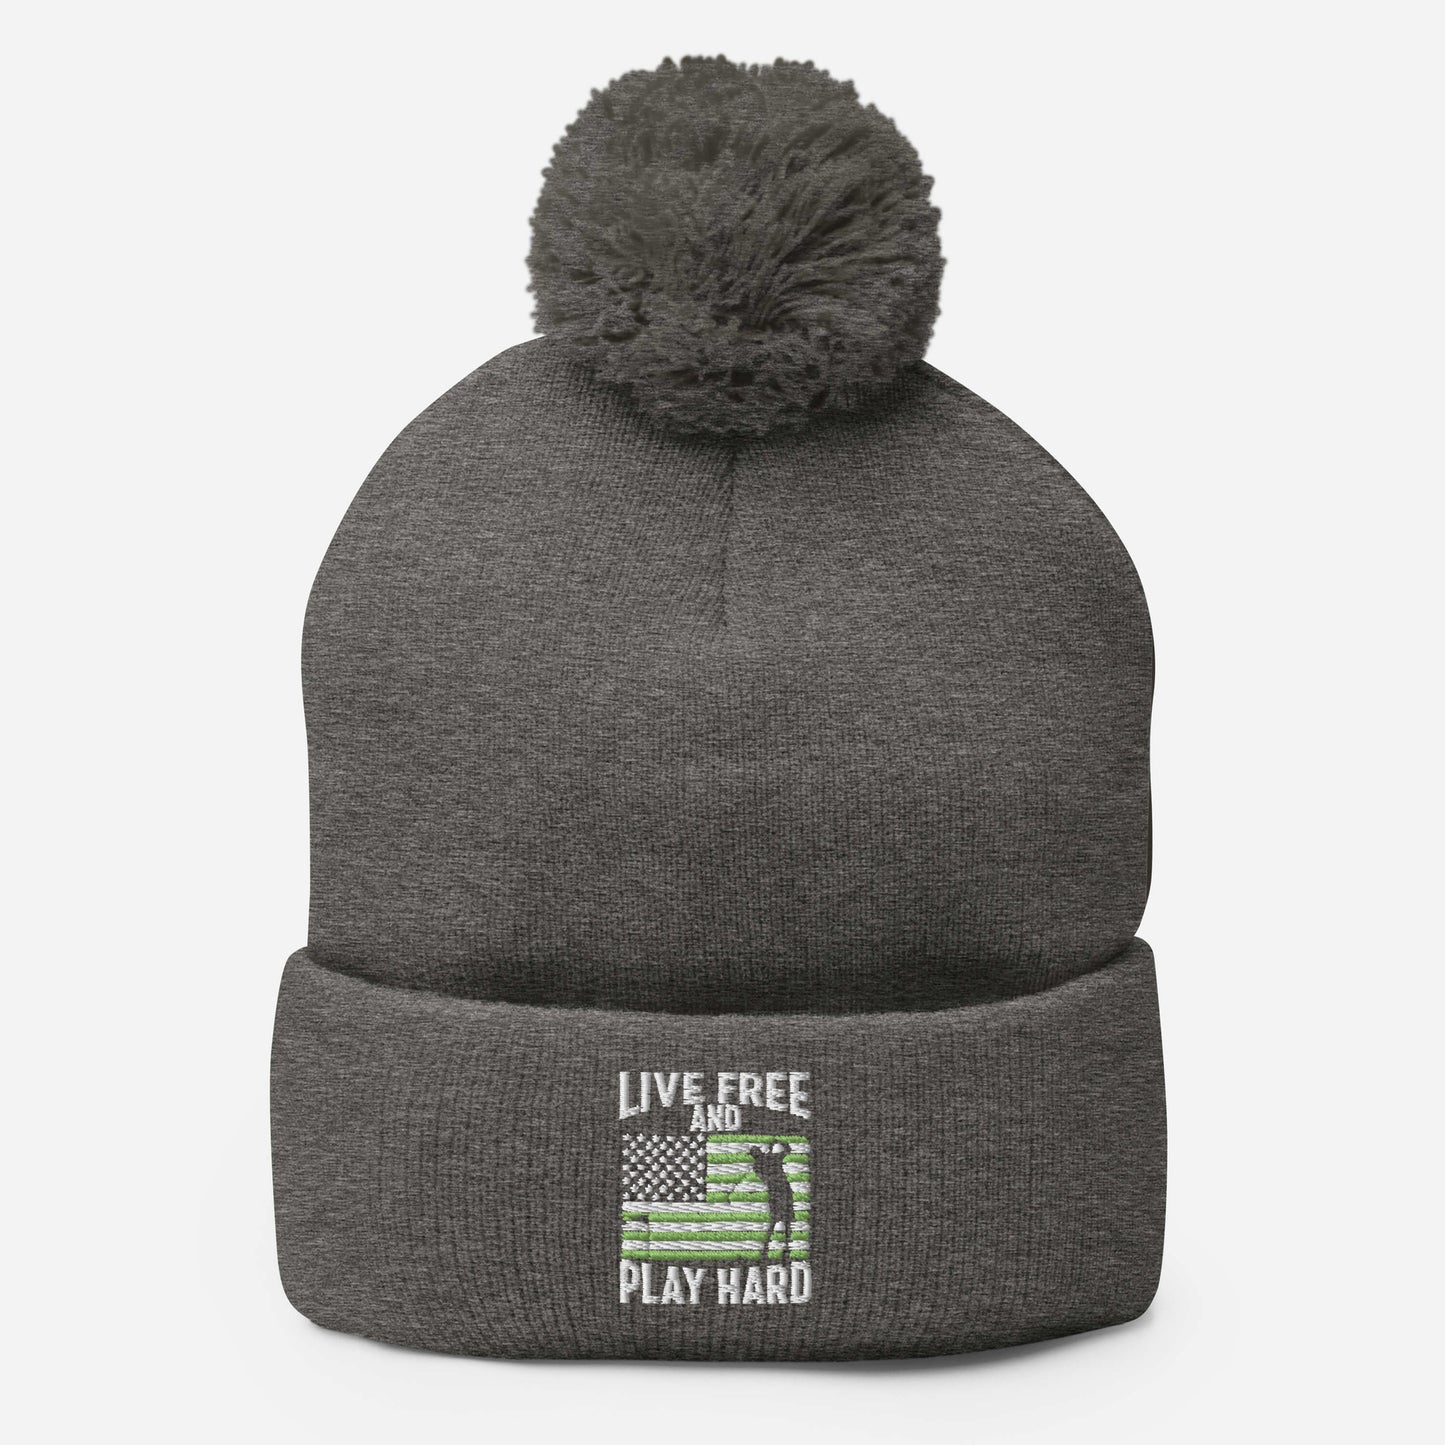 Live Free and Play Hard Beanie (Military Appreciation)